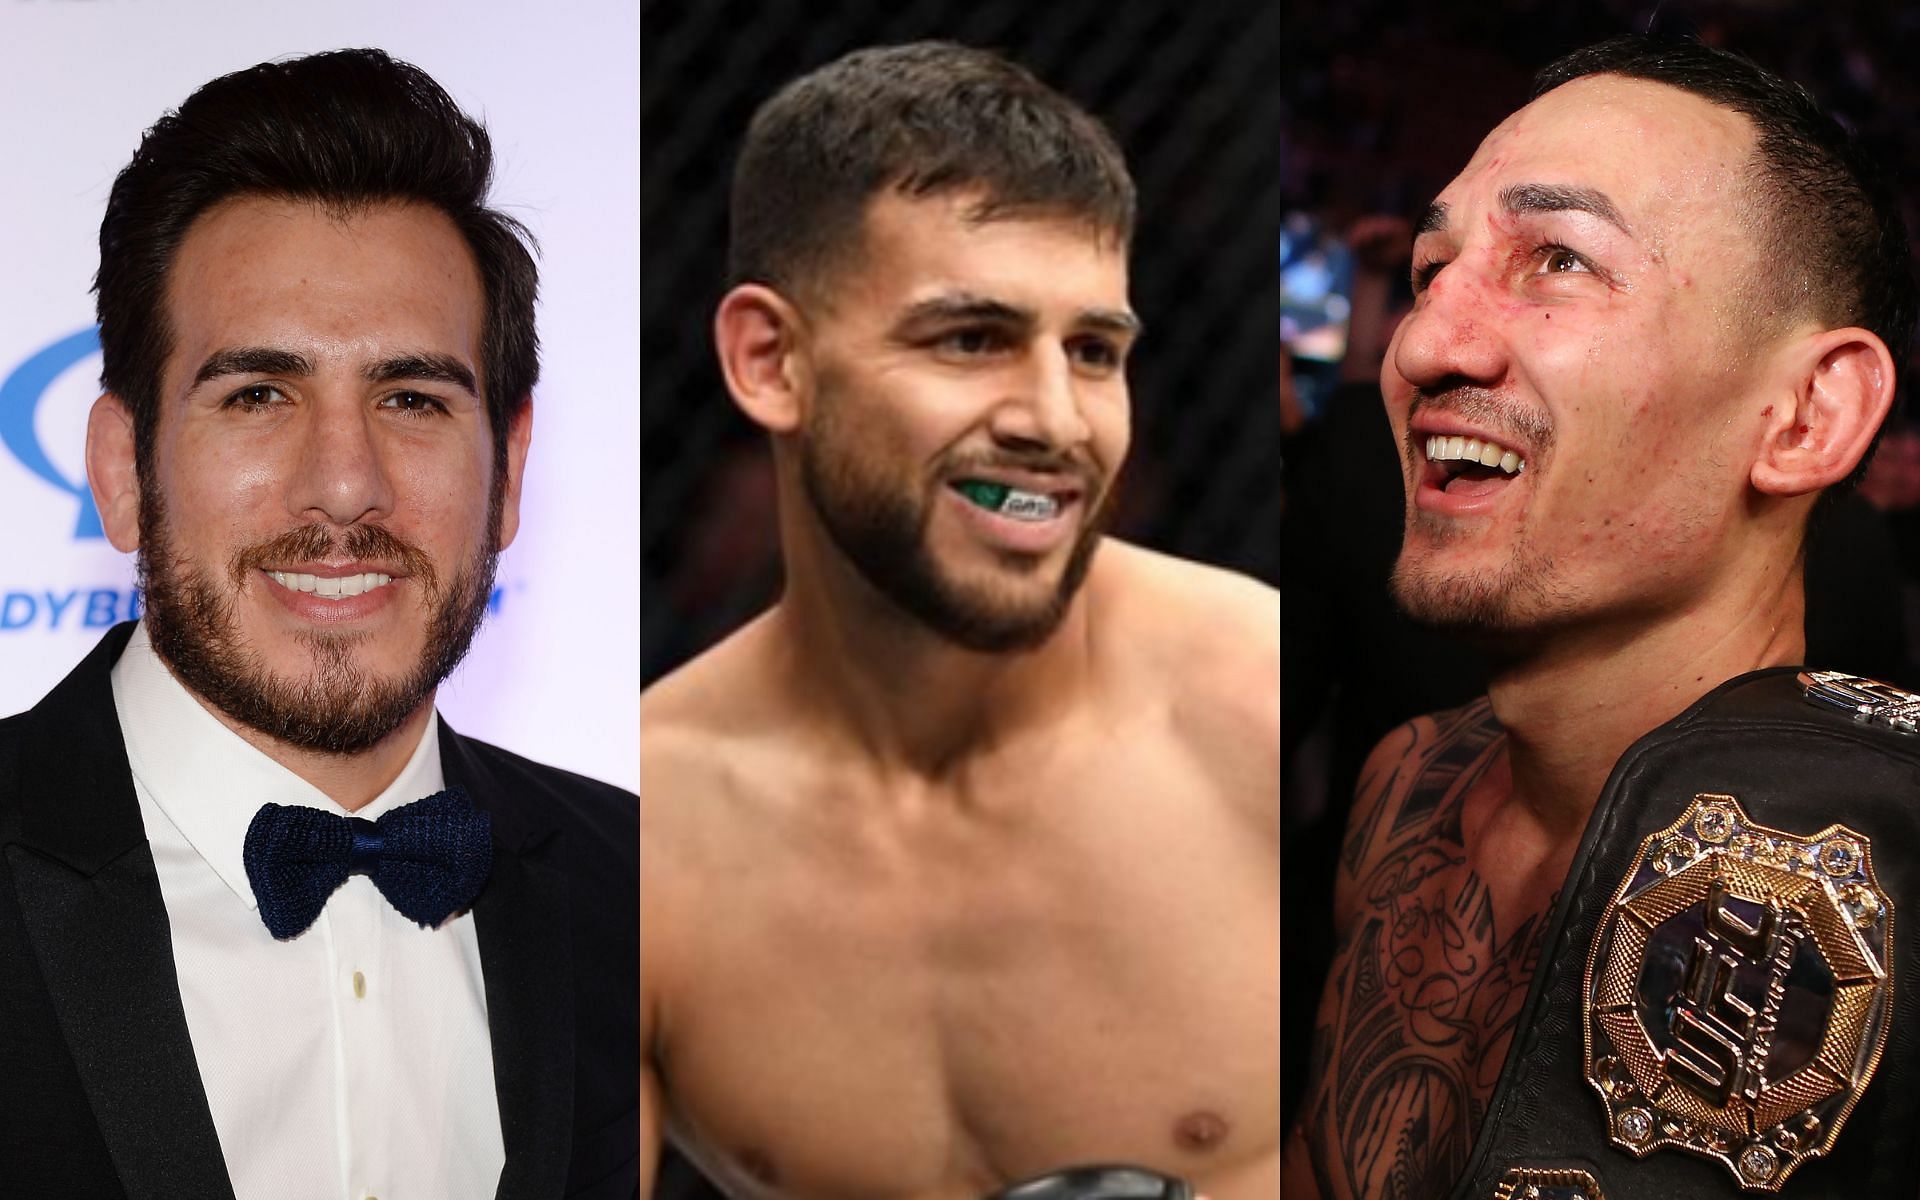 Kenny Florian (left) and UFC featherweight contenders Yair Rodriguez (center; Image Credit: @panteraufc on Instagram) and Max Holloway (right)